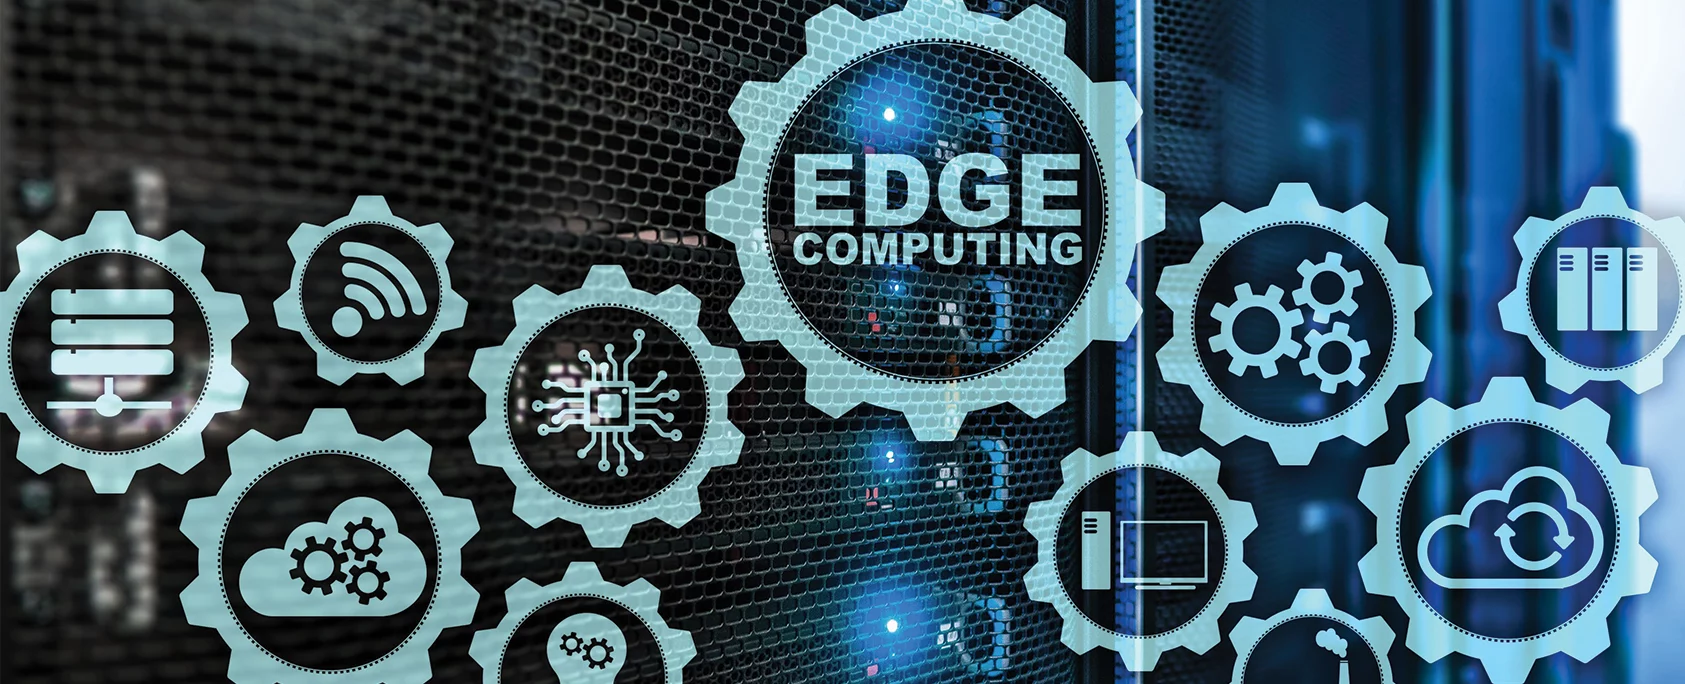 Top 5 Factors to Consider for Deploying Reliable Edge Computing